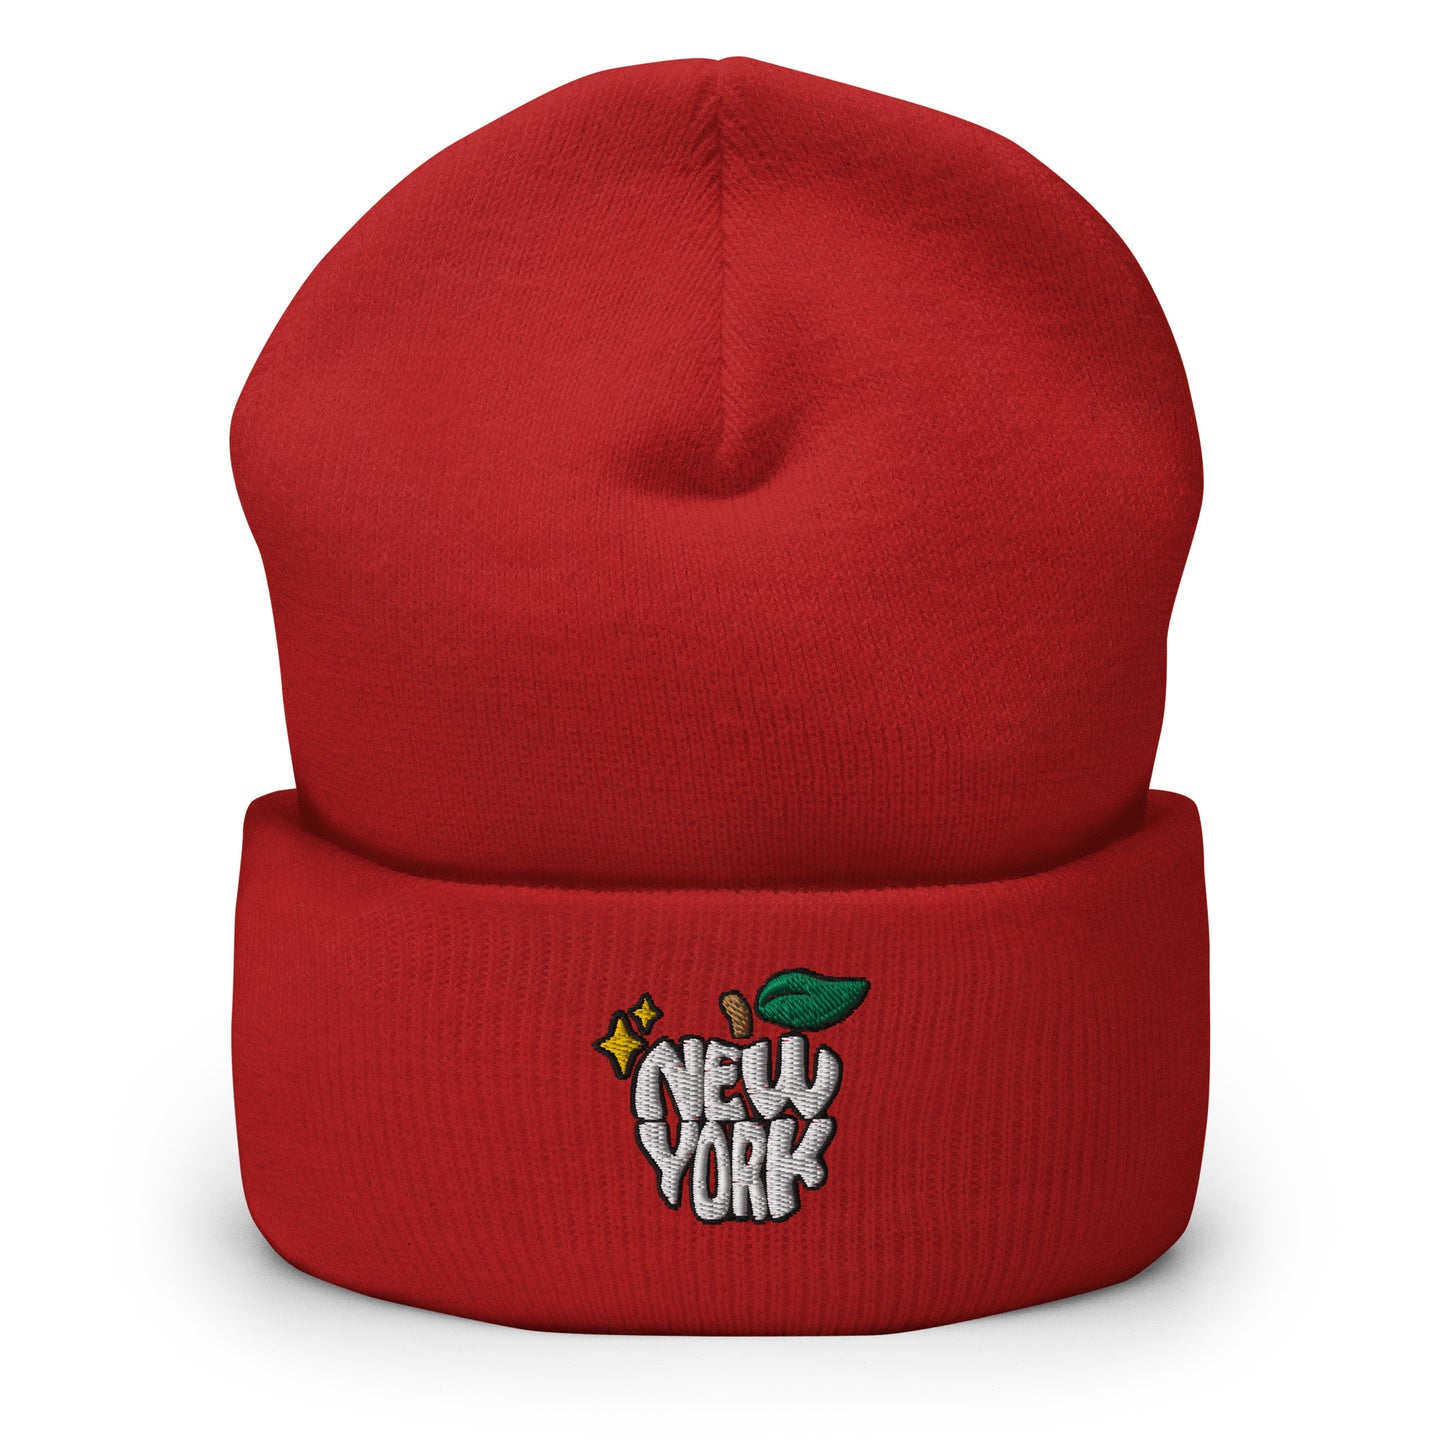 New York Apple Logo Embroidered Red Cuffed Beanie Hat Scattered Streetwear